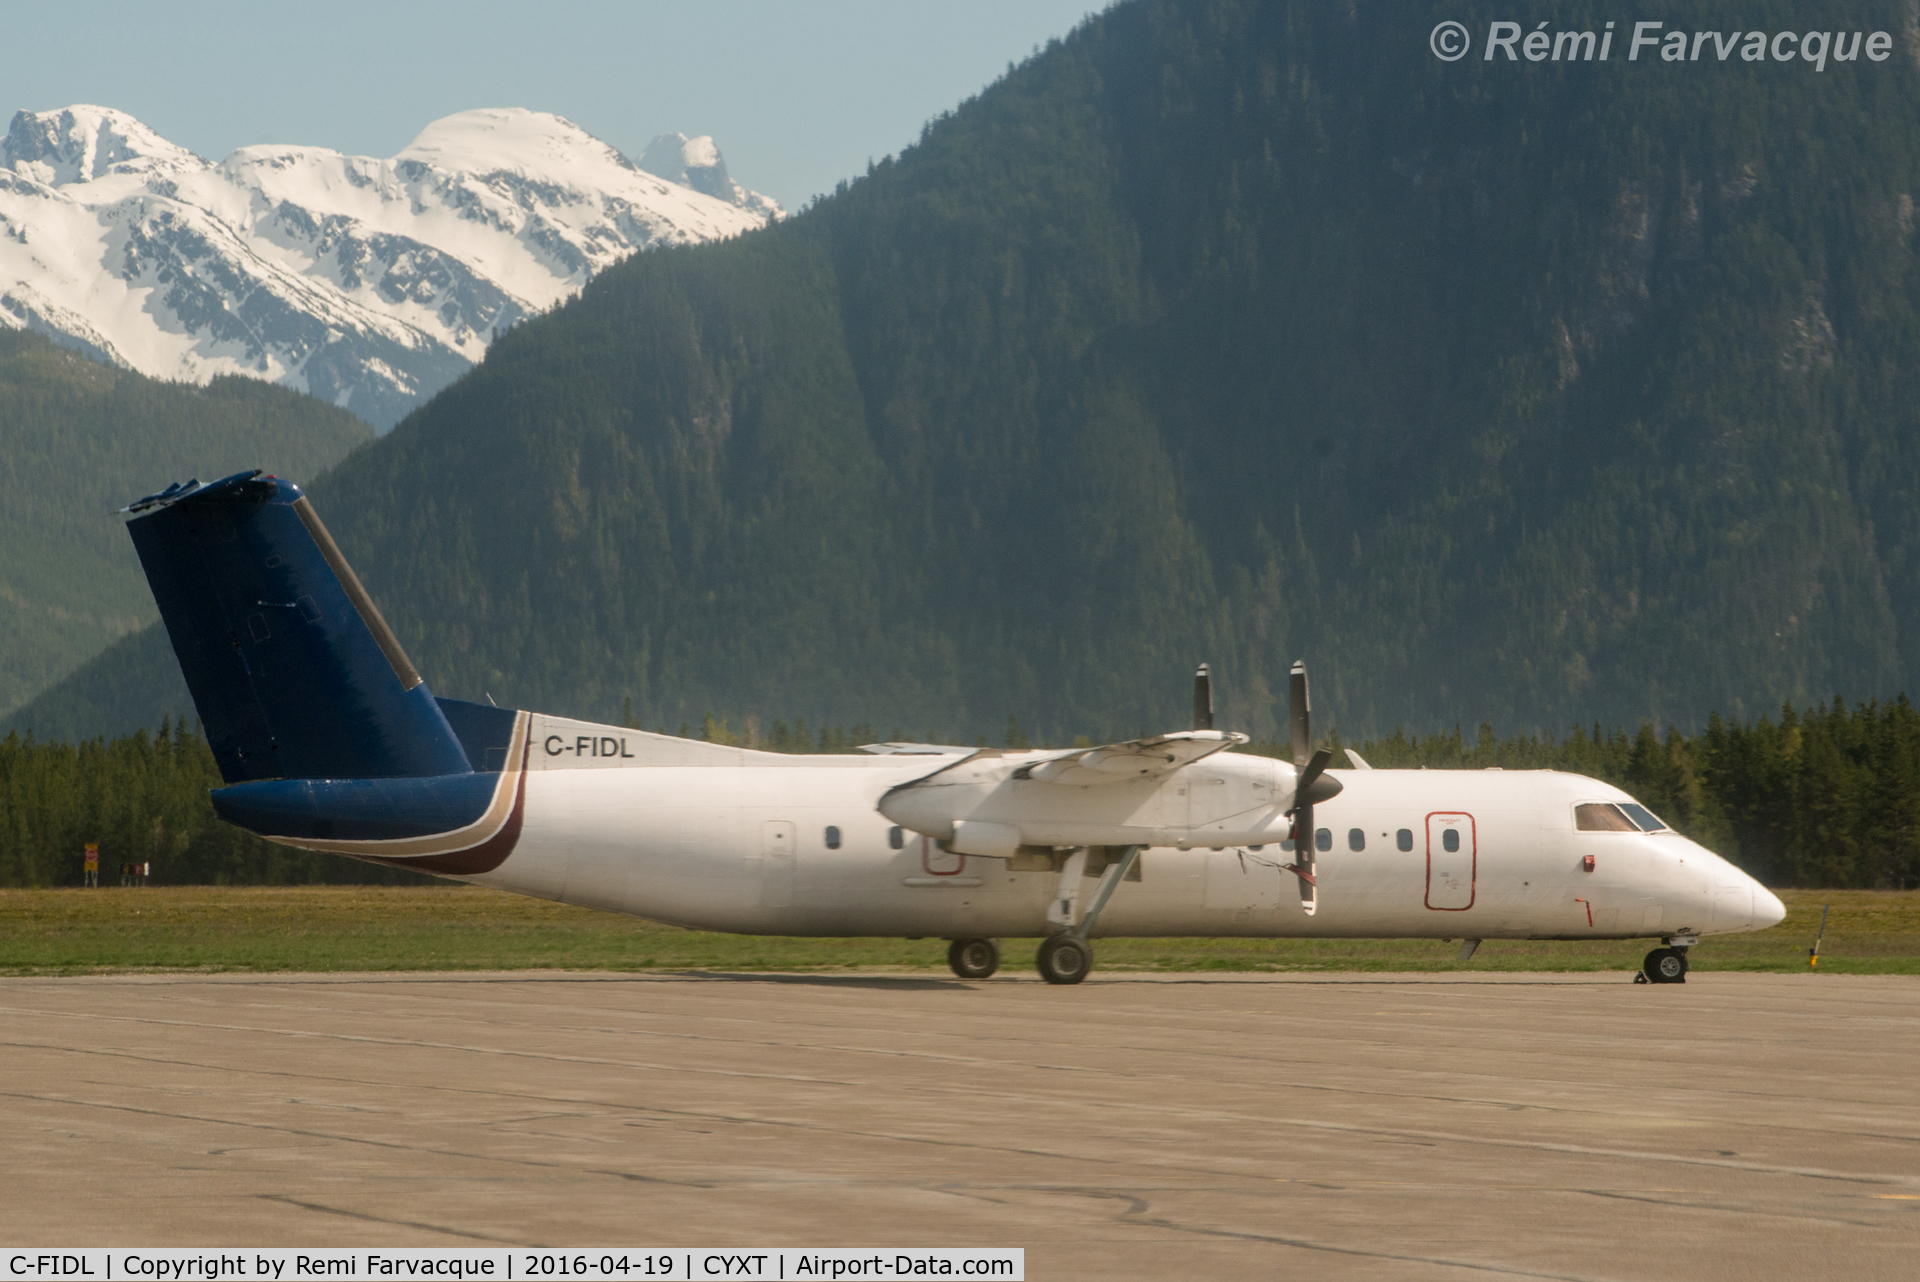 C-FIDL, 1991 De Havilland Canada DHC-8-311A Dash 8 C/N 305, Livery removed since last seen previously. Sold ?